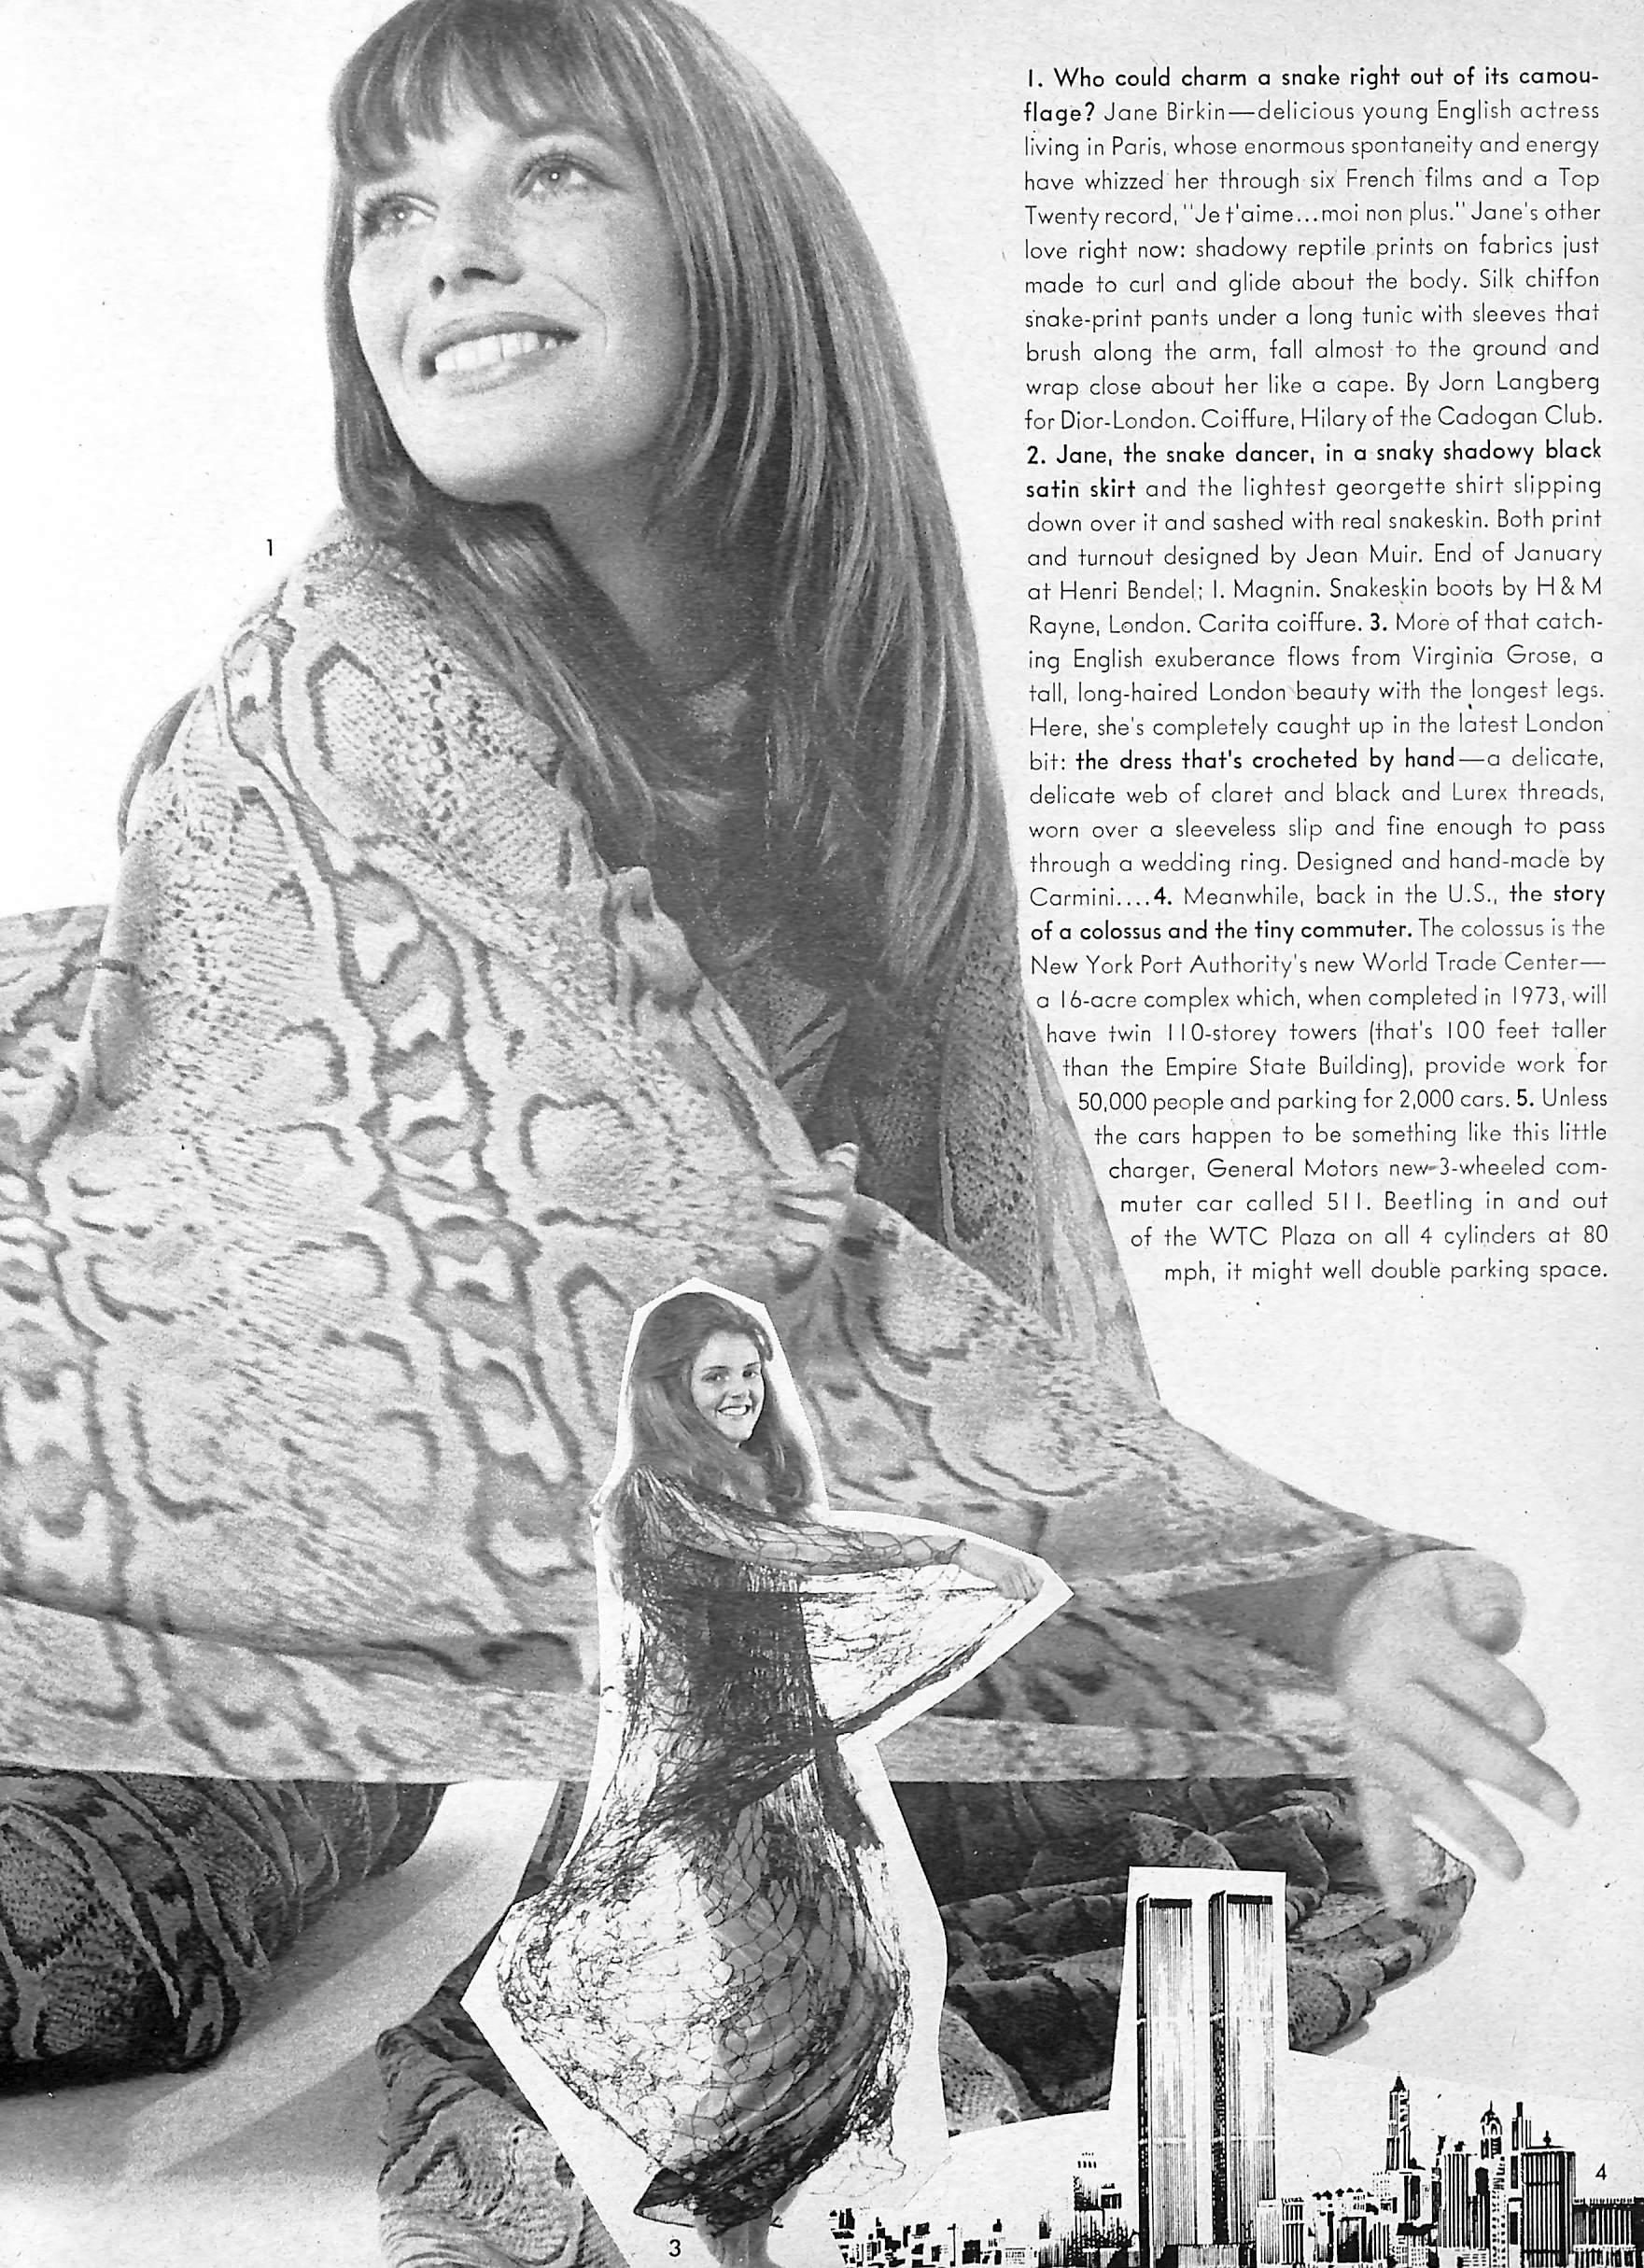 Fashion Forecast: The beautiful hippies—Pilar Crespi in fringe; Marisa Berenson and the one-strap shoulder bag . . . The new fur-lined coat- double-faced mink, printed on the hide side. The London Bit—clothes from England's bright young designers